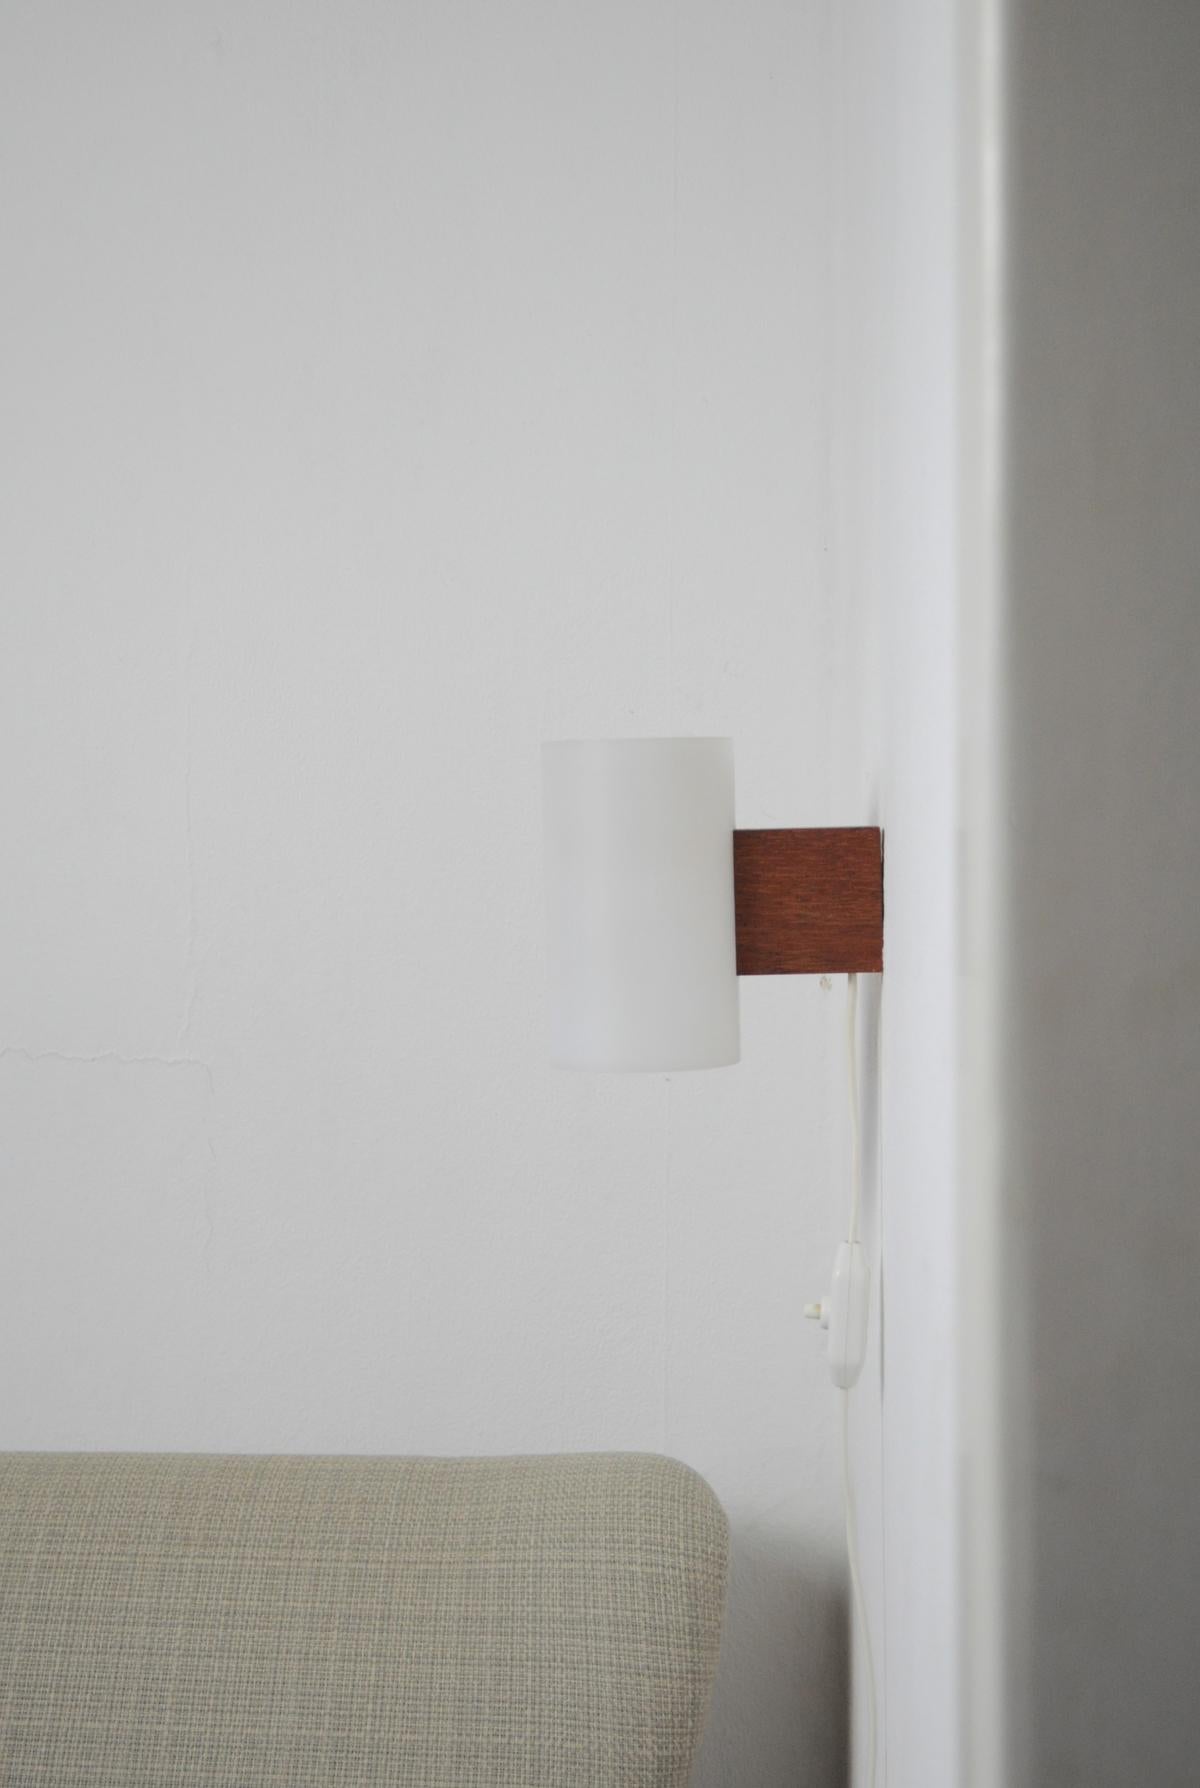 Swedish teak and acrylate wall lamp designed by Uno & Östen Kristiansson and manufactured by Luxus, Sweden. 
Magnificent minimalistic design.

Diameter of lamp shade: 8 cm 
Height: 13.5 cm
Depth: 13.5 cm